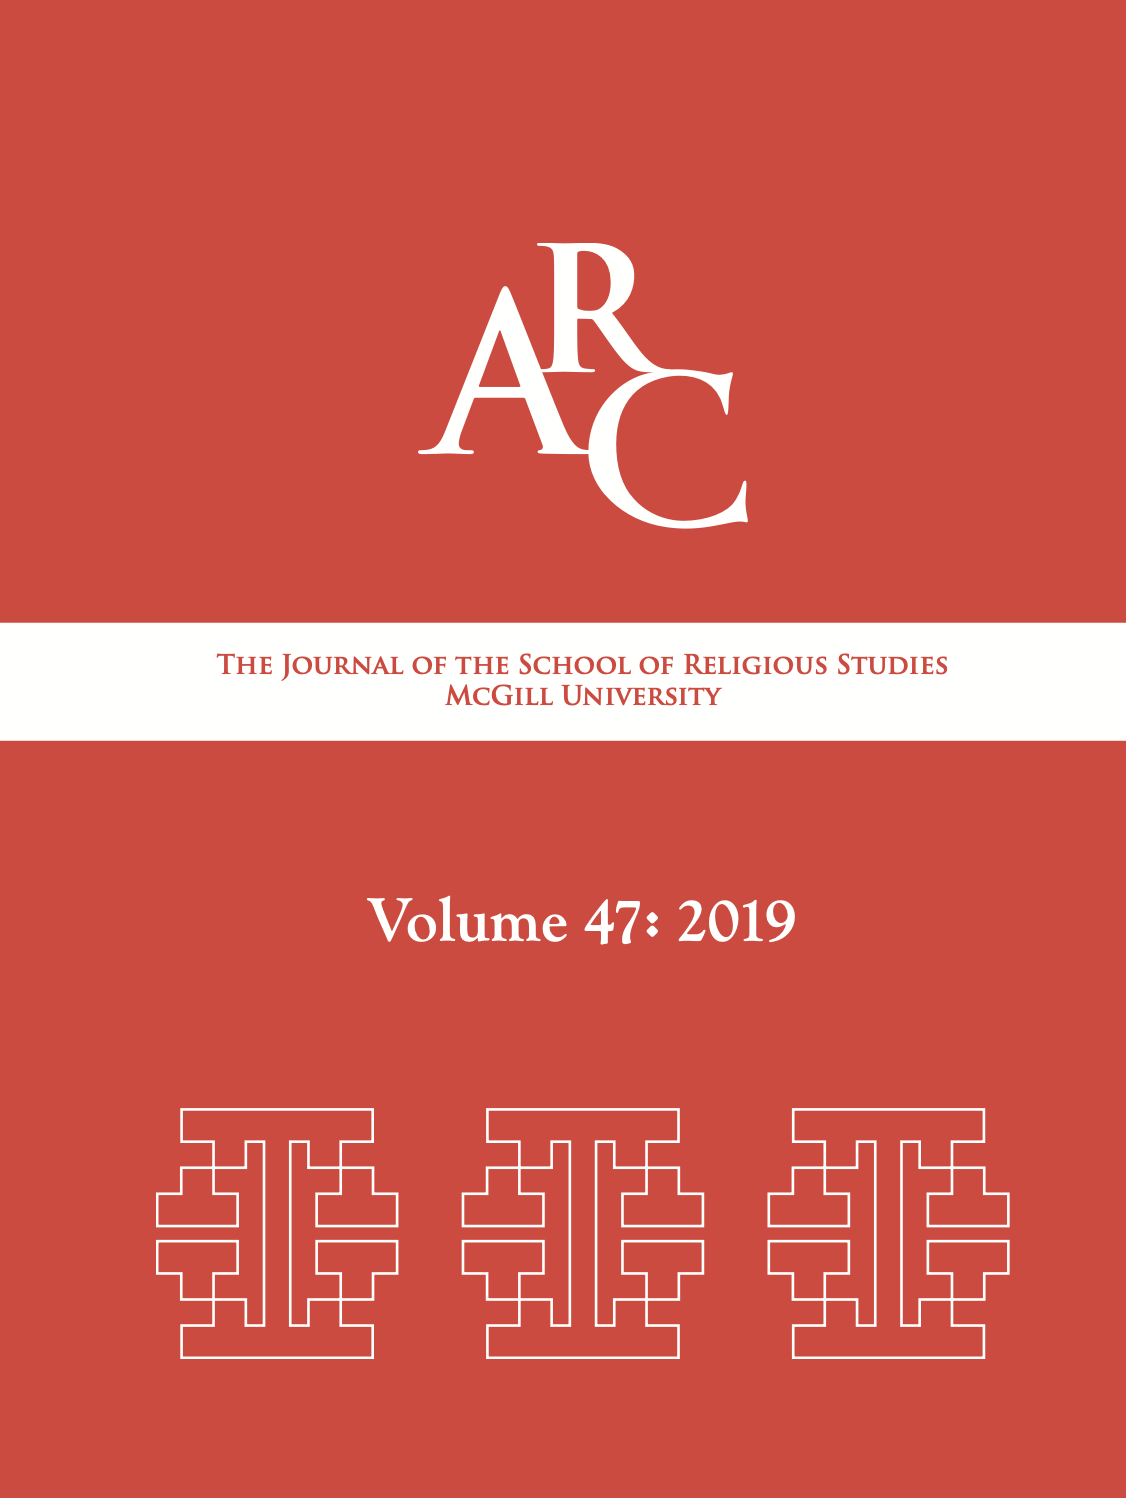 					View Vol. 47 (2019): Arc: The Journal of the School of Religious Studies
				